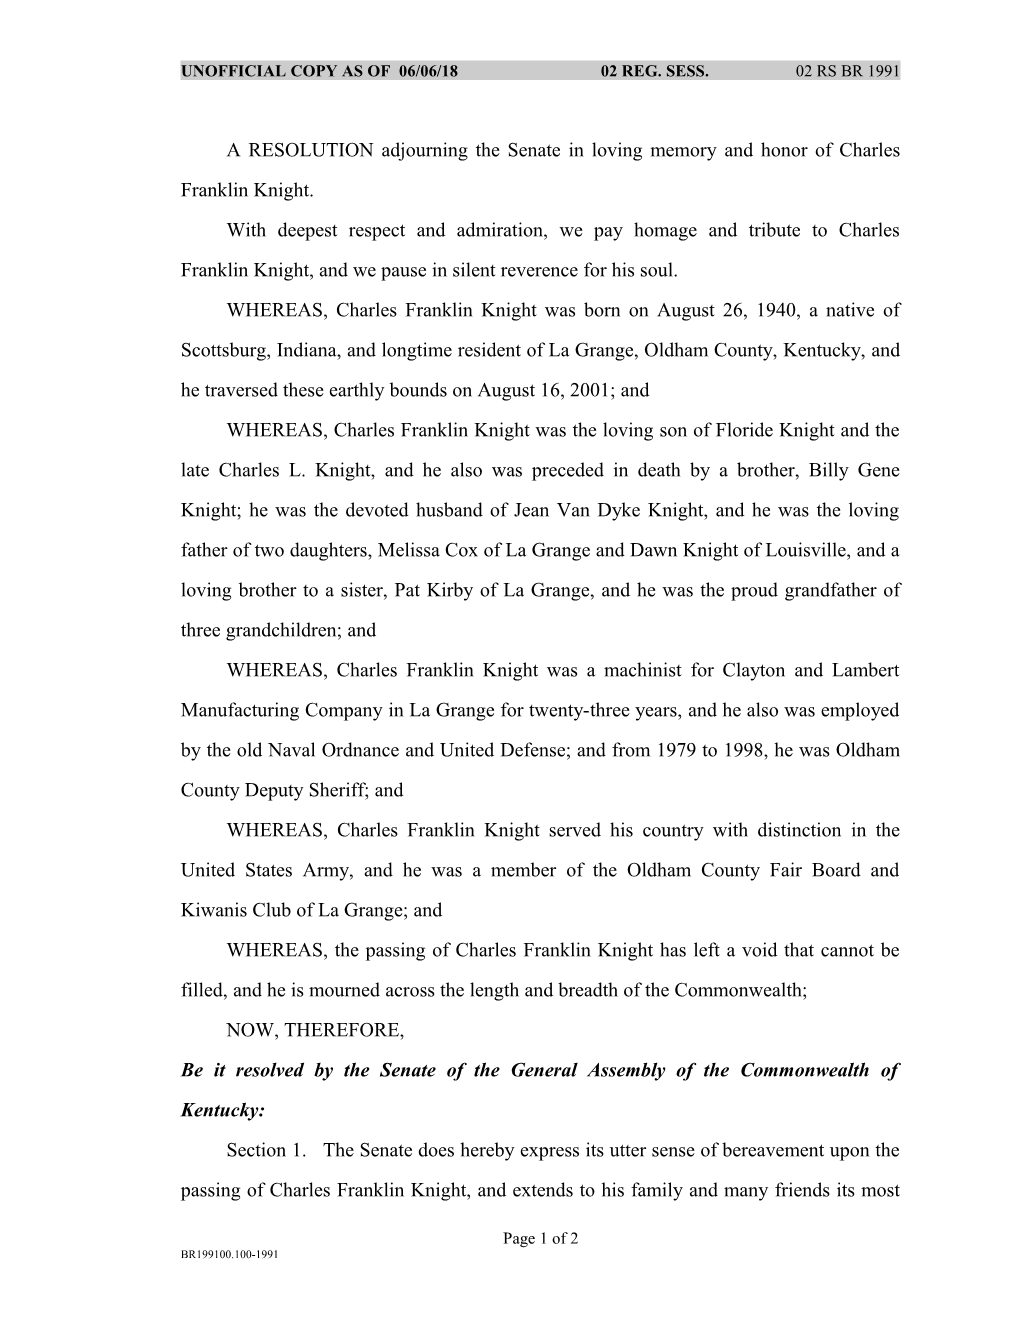 A RESOLUTION Adjourning the Senate in Loving Memory and Honor of Charles Franklin Knight